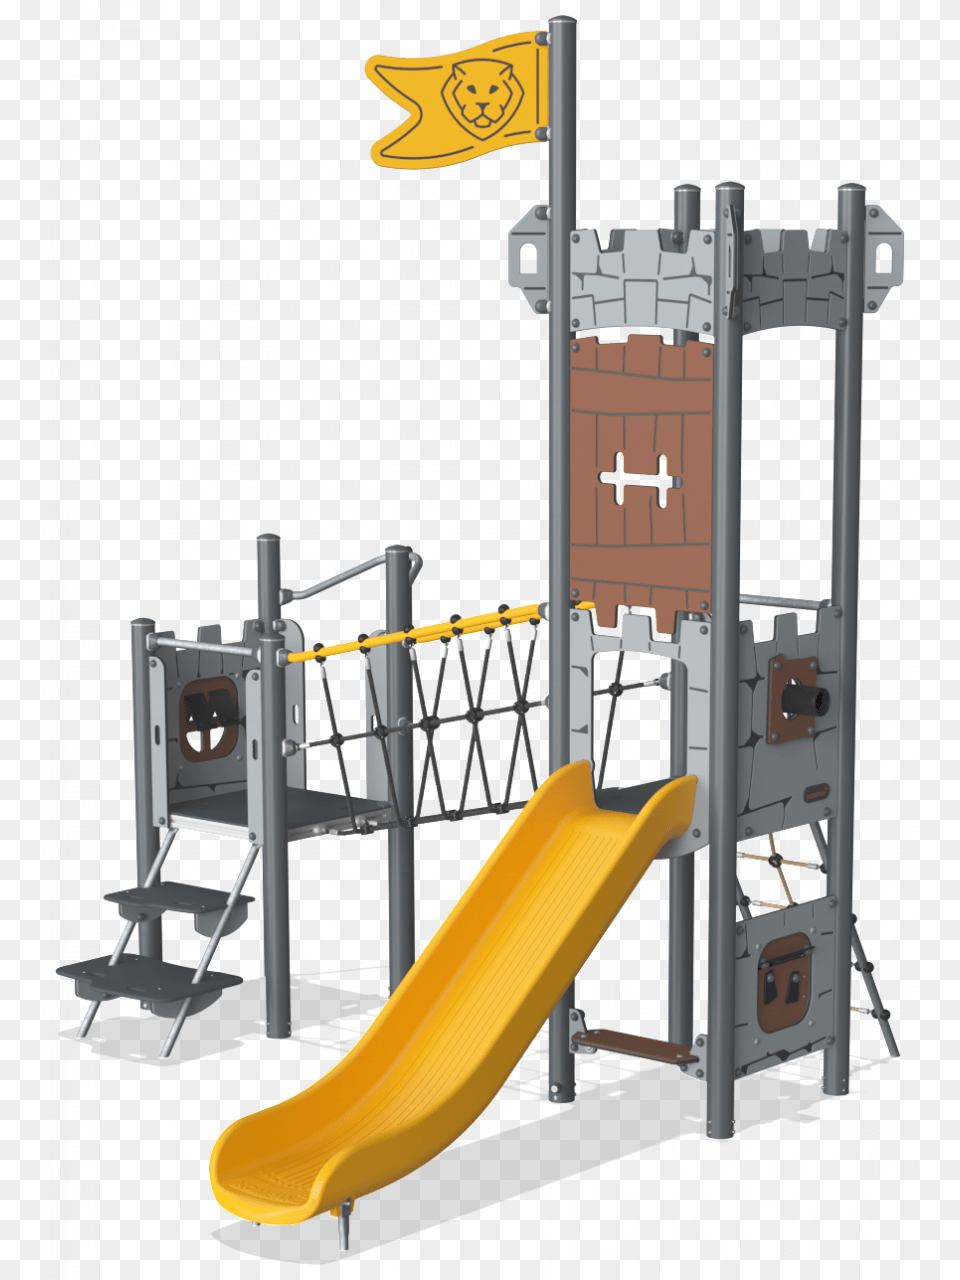 Playground Slide Kompan, Outdoor Play Area, Outdoors, Play Area Free Png